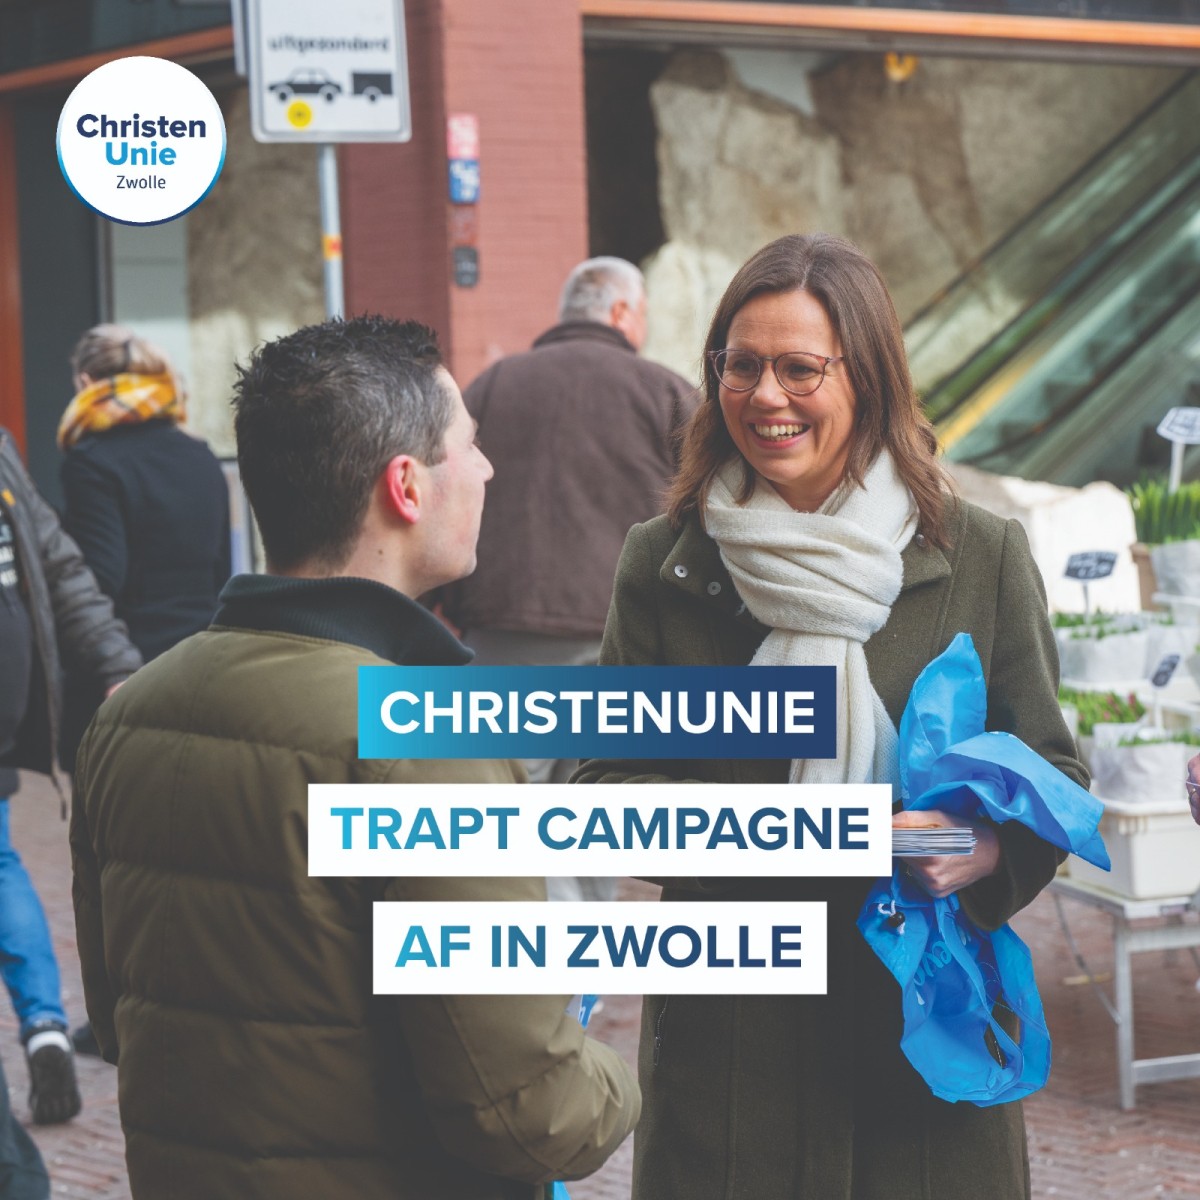 Aftrap campagne in Zwolle